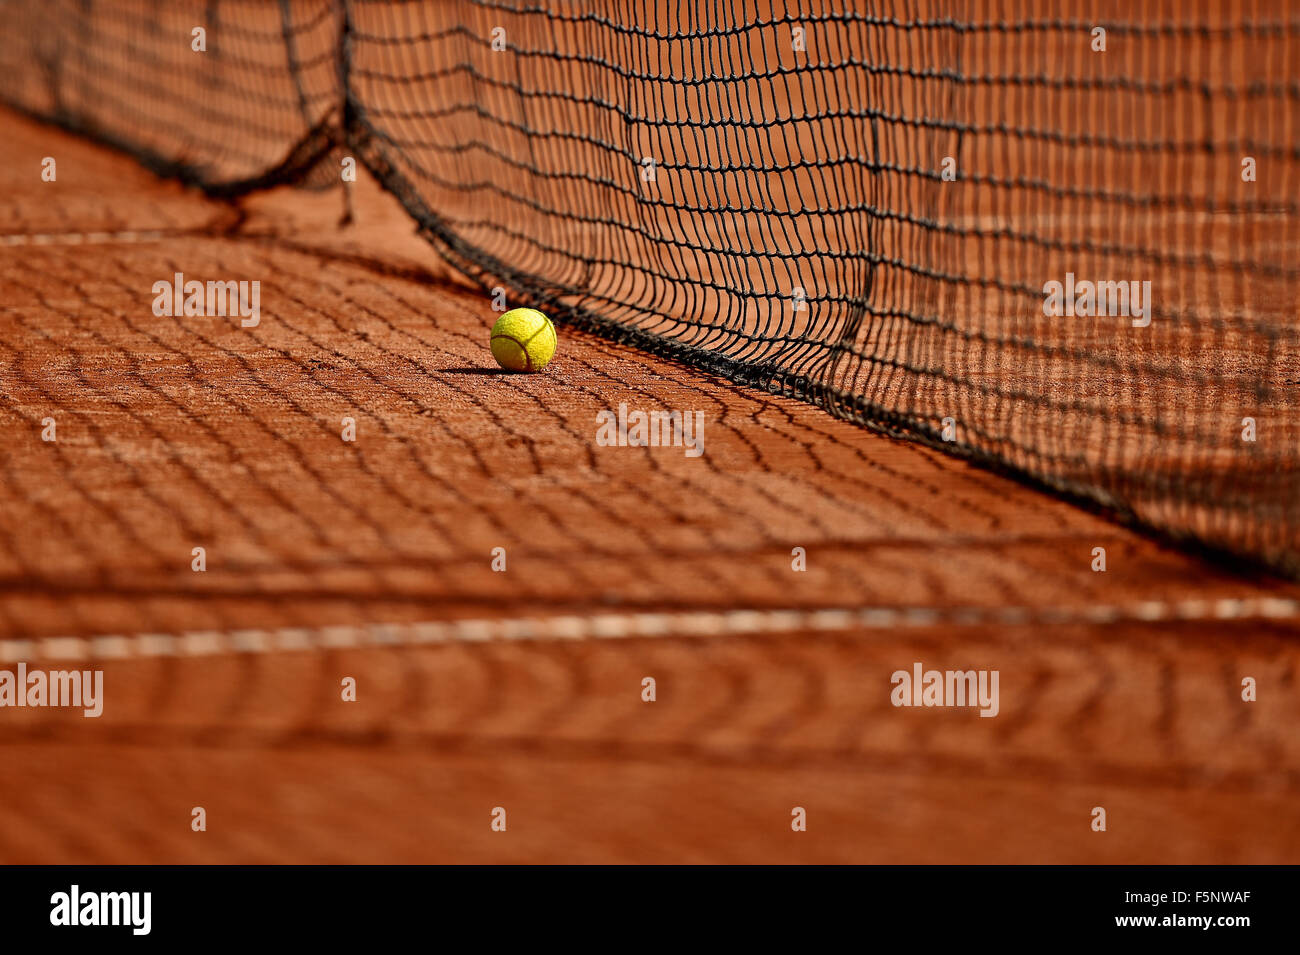 Detail shot with a tennis ball close to the net on a tennis clay court Stock Photo